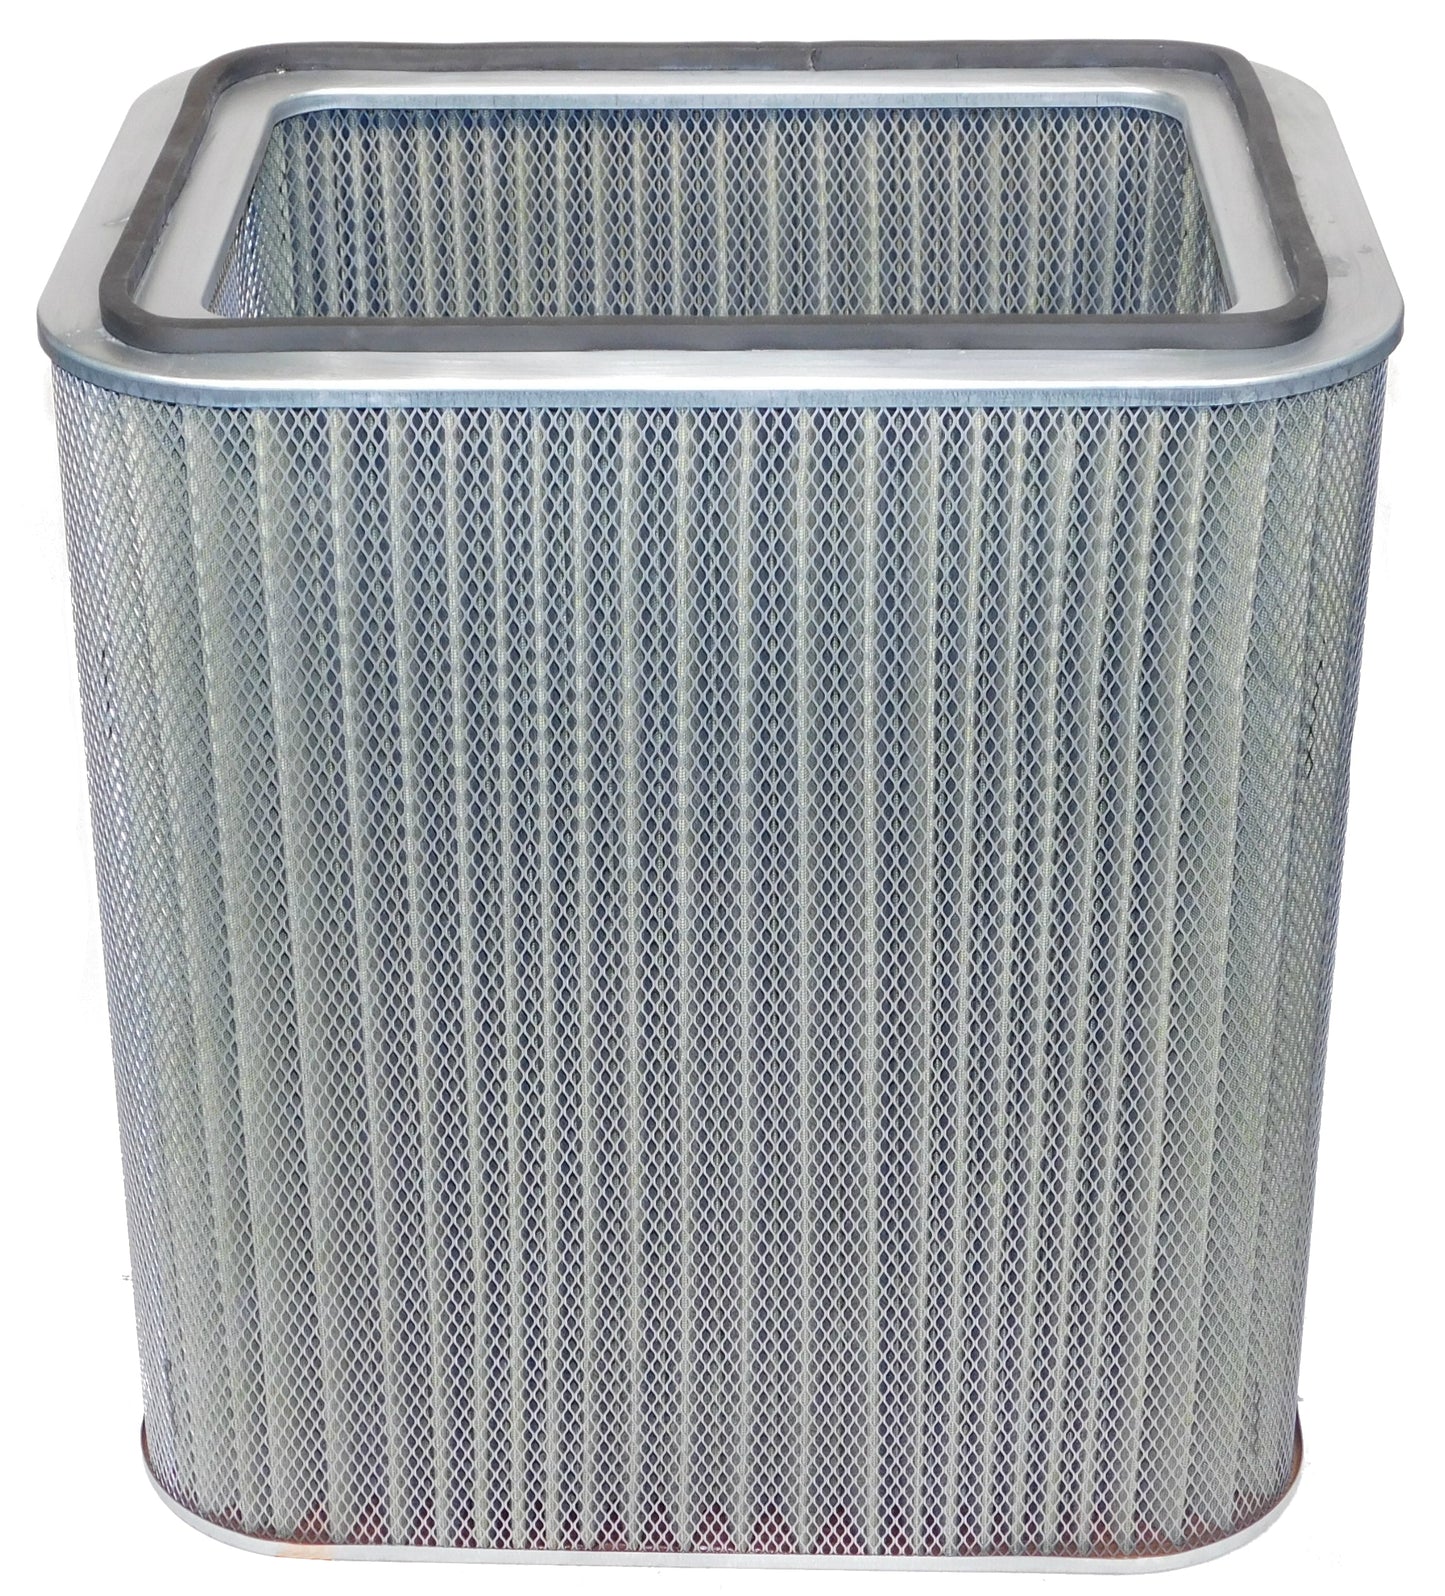 P031775-016-002 - Replacement for Torit filter